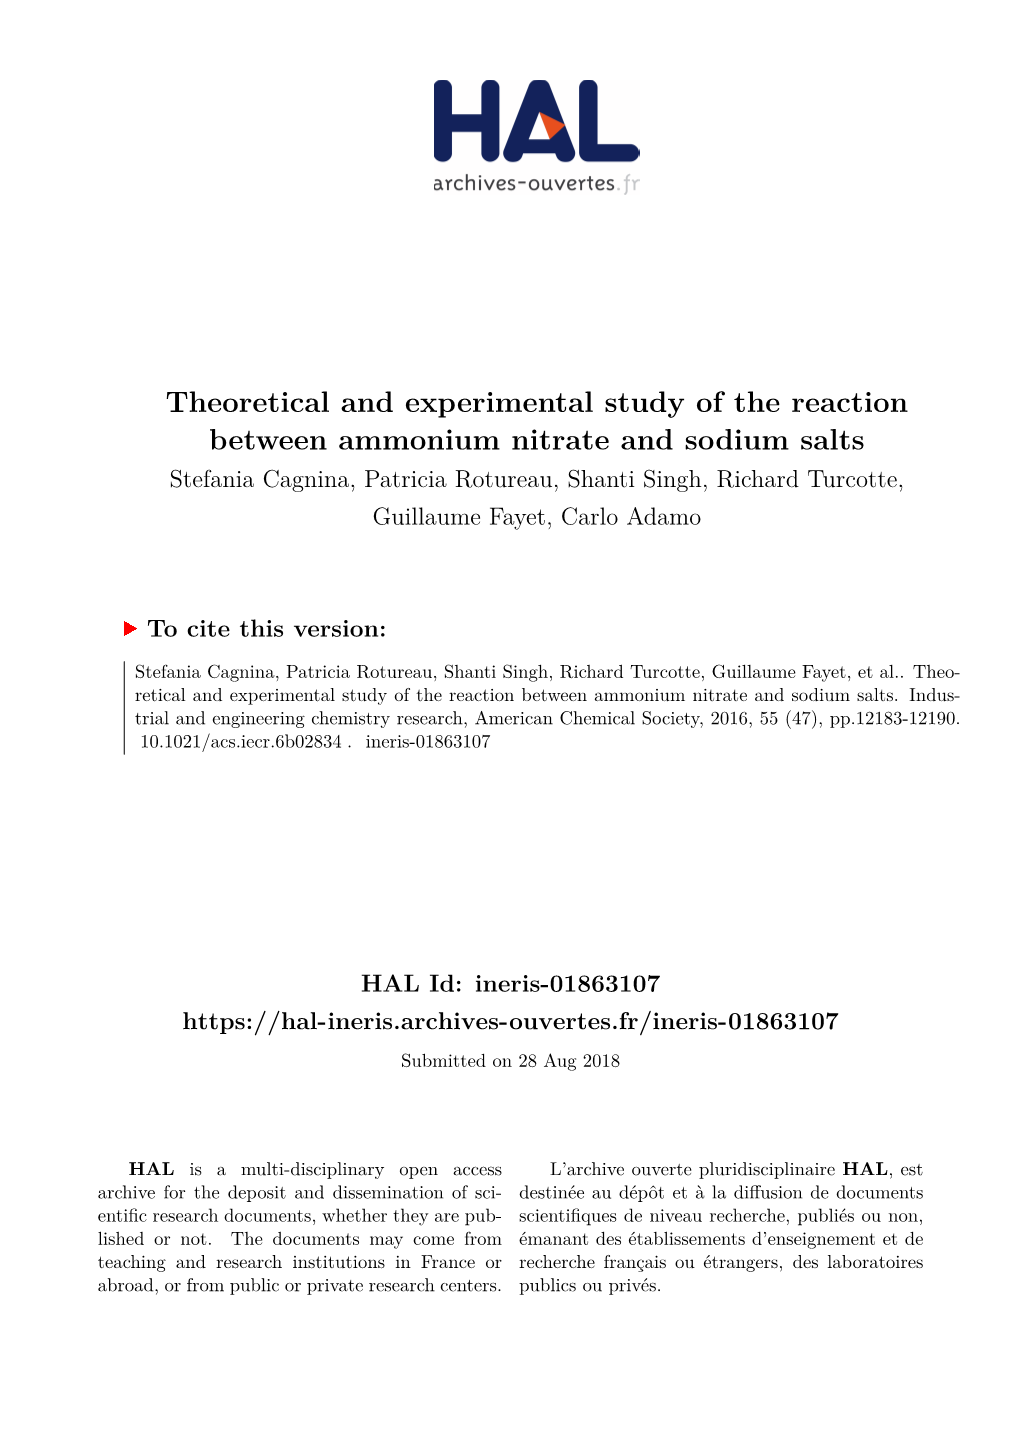 Theoretical and Experimental Study of the Reaction Between Ammonium